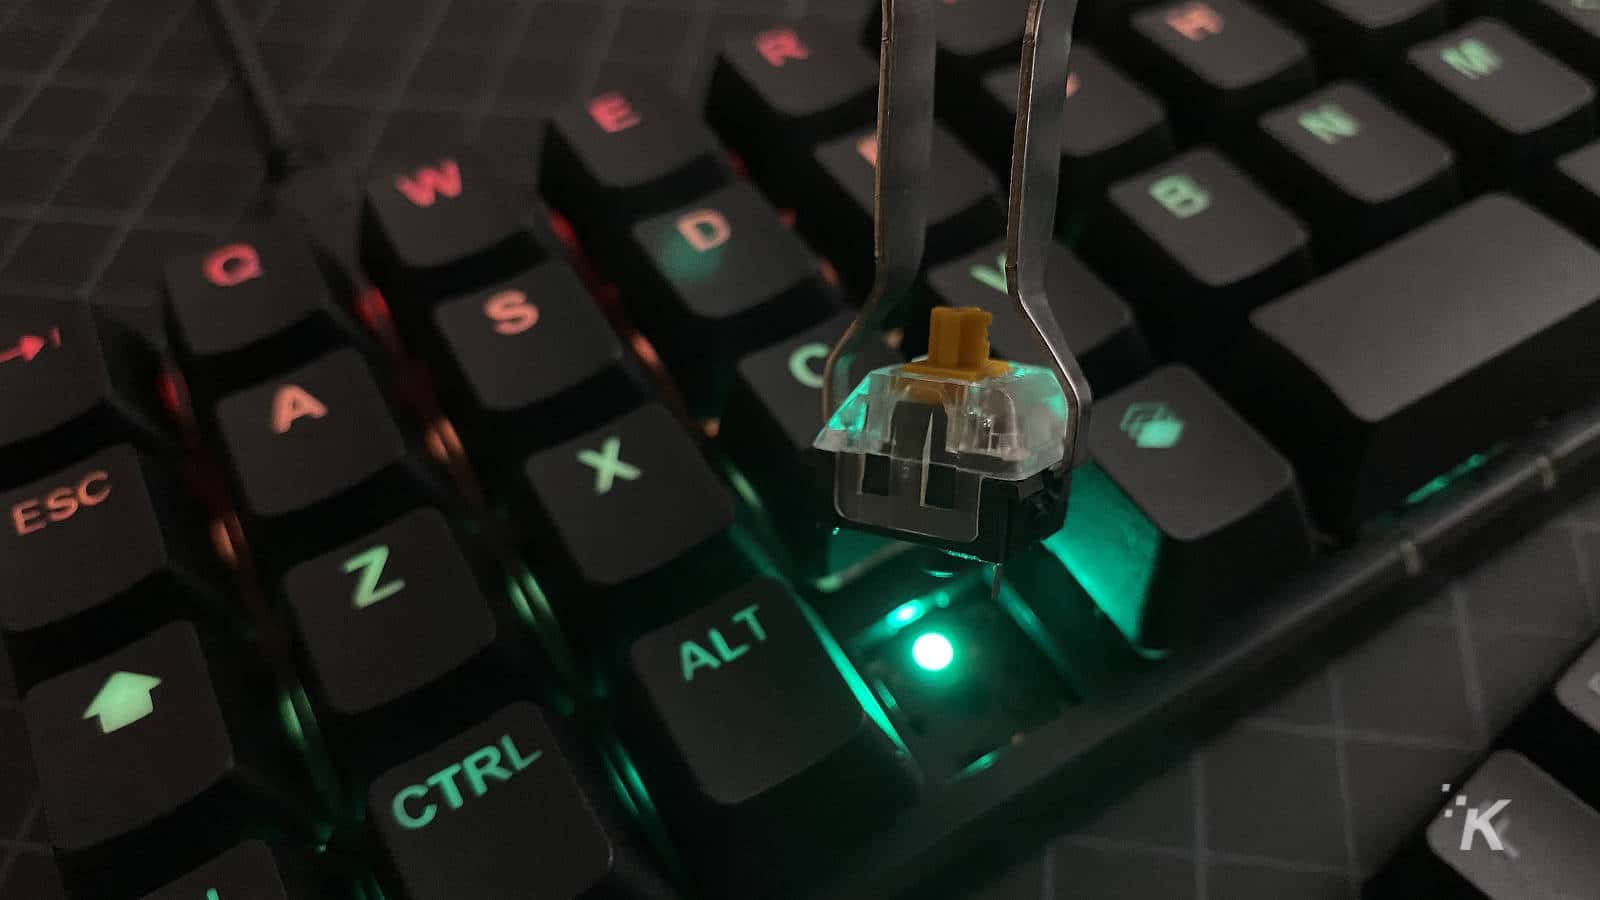 A Green Led Is On A Keyboard